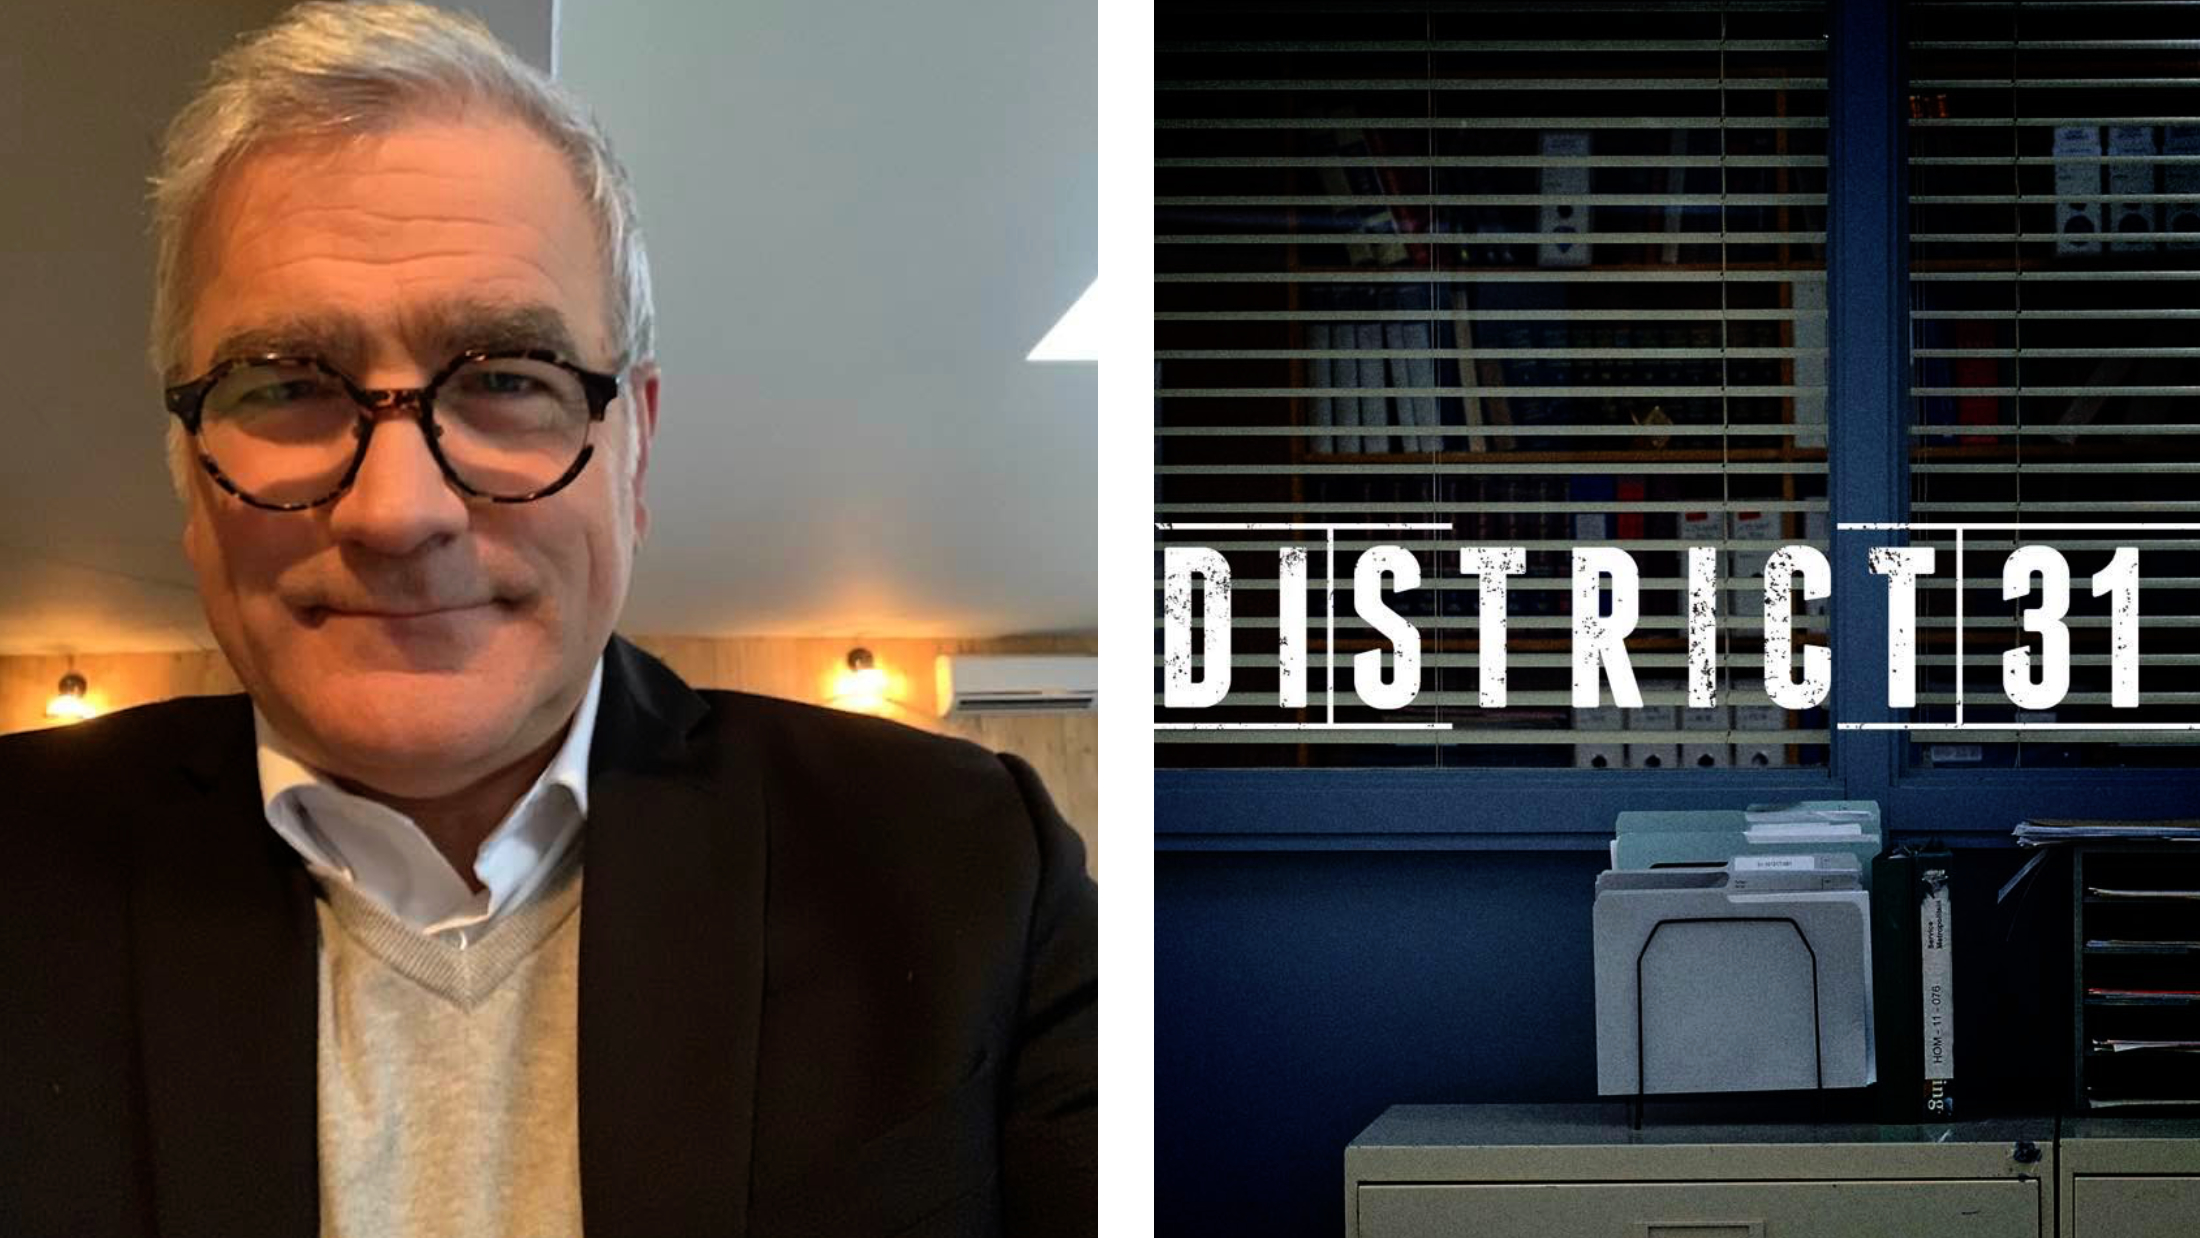 District 31: The actor who plays M Sebastien Durand bids farewell to his role